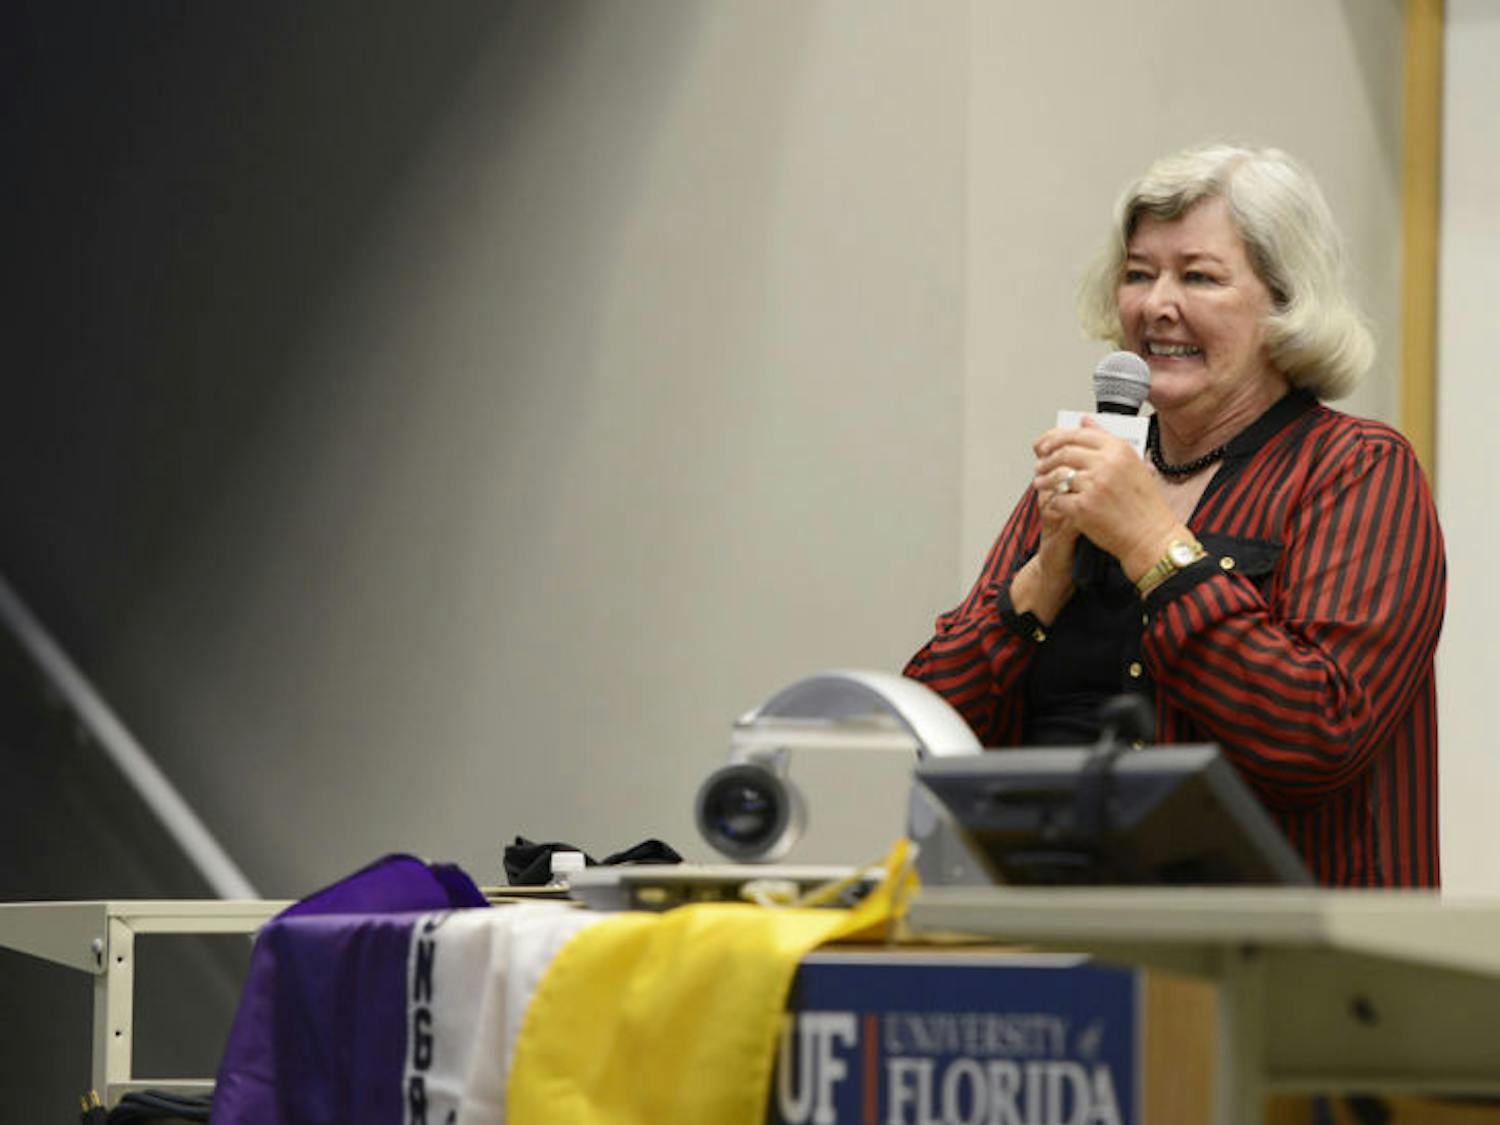 Former U.S. Representative Patricia Schroeder speaks to about 200 people at the Buddy &amp; Anne MacKay Auditorium on Monday evening.